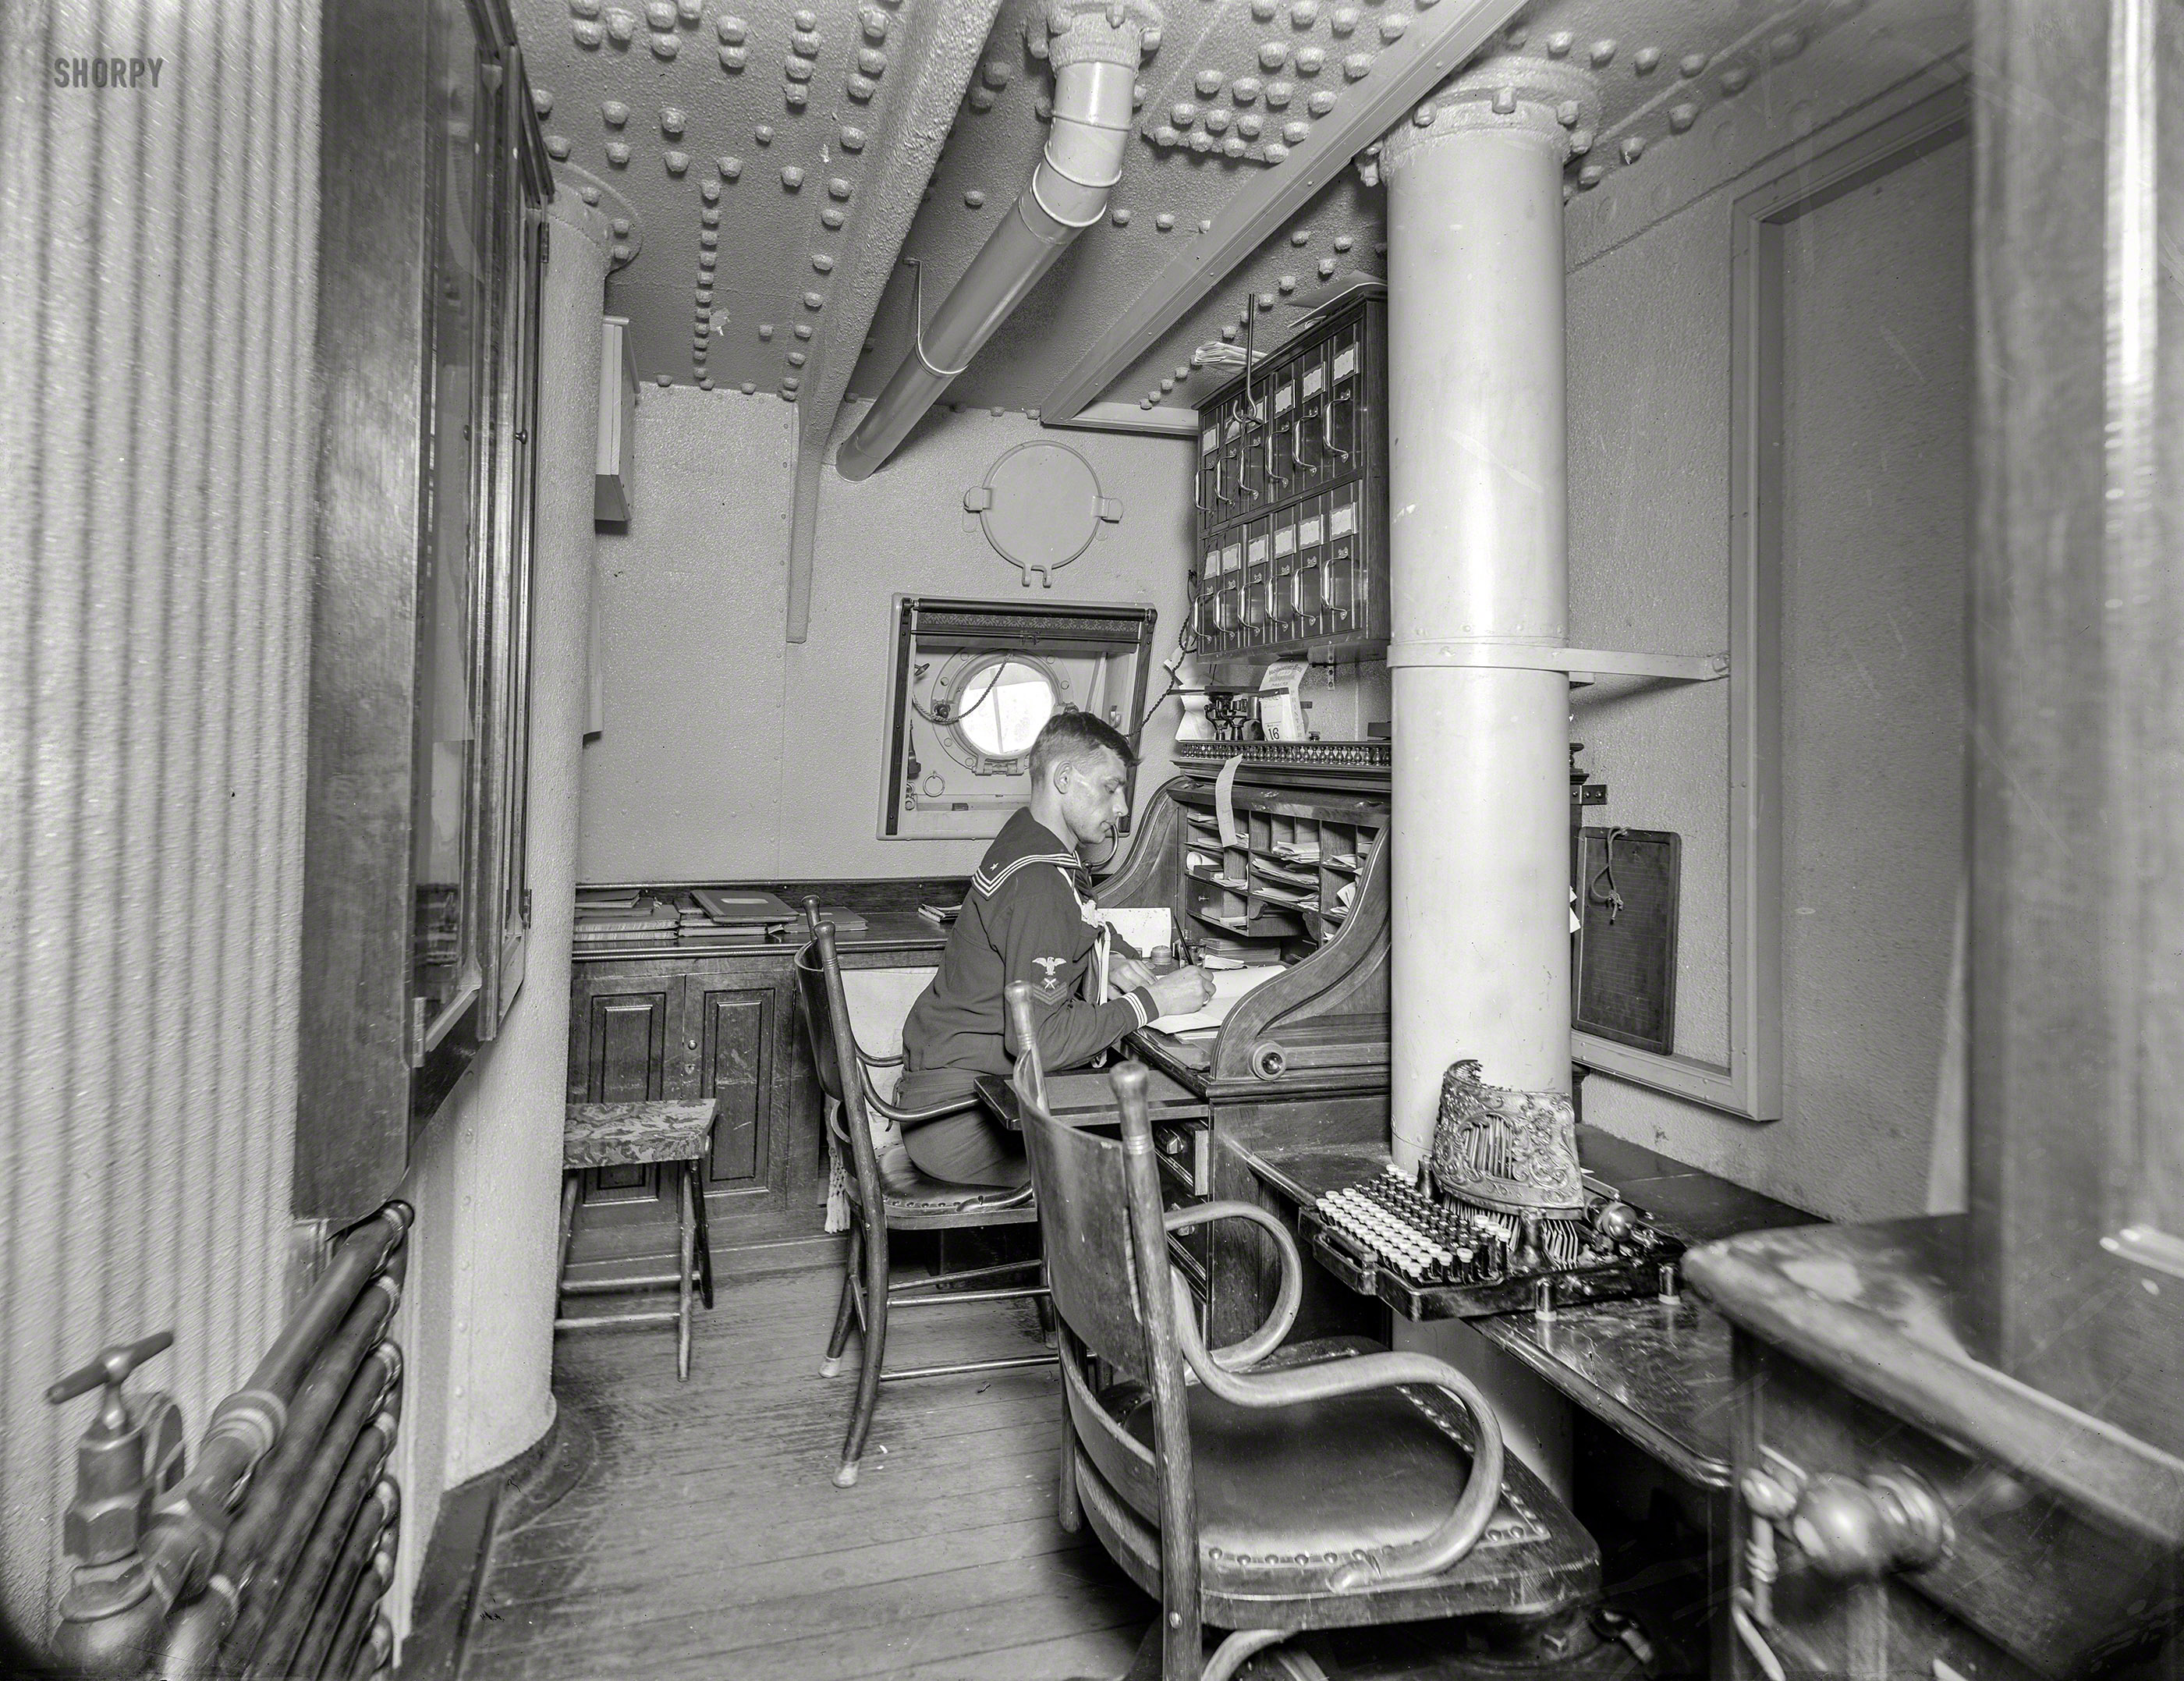 March 16, 1897. "U.S.S. Brooklyn, office of executive officer." Note the ancient typewriter. 8x10 inch glass negative, Detroit Photographic Co. View full size.